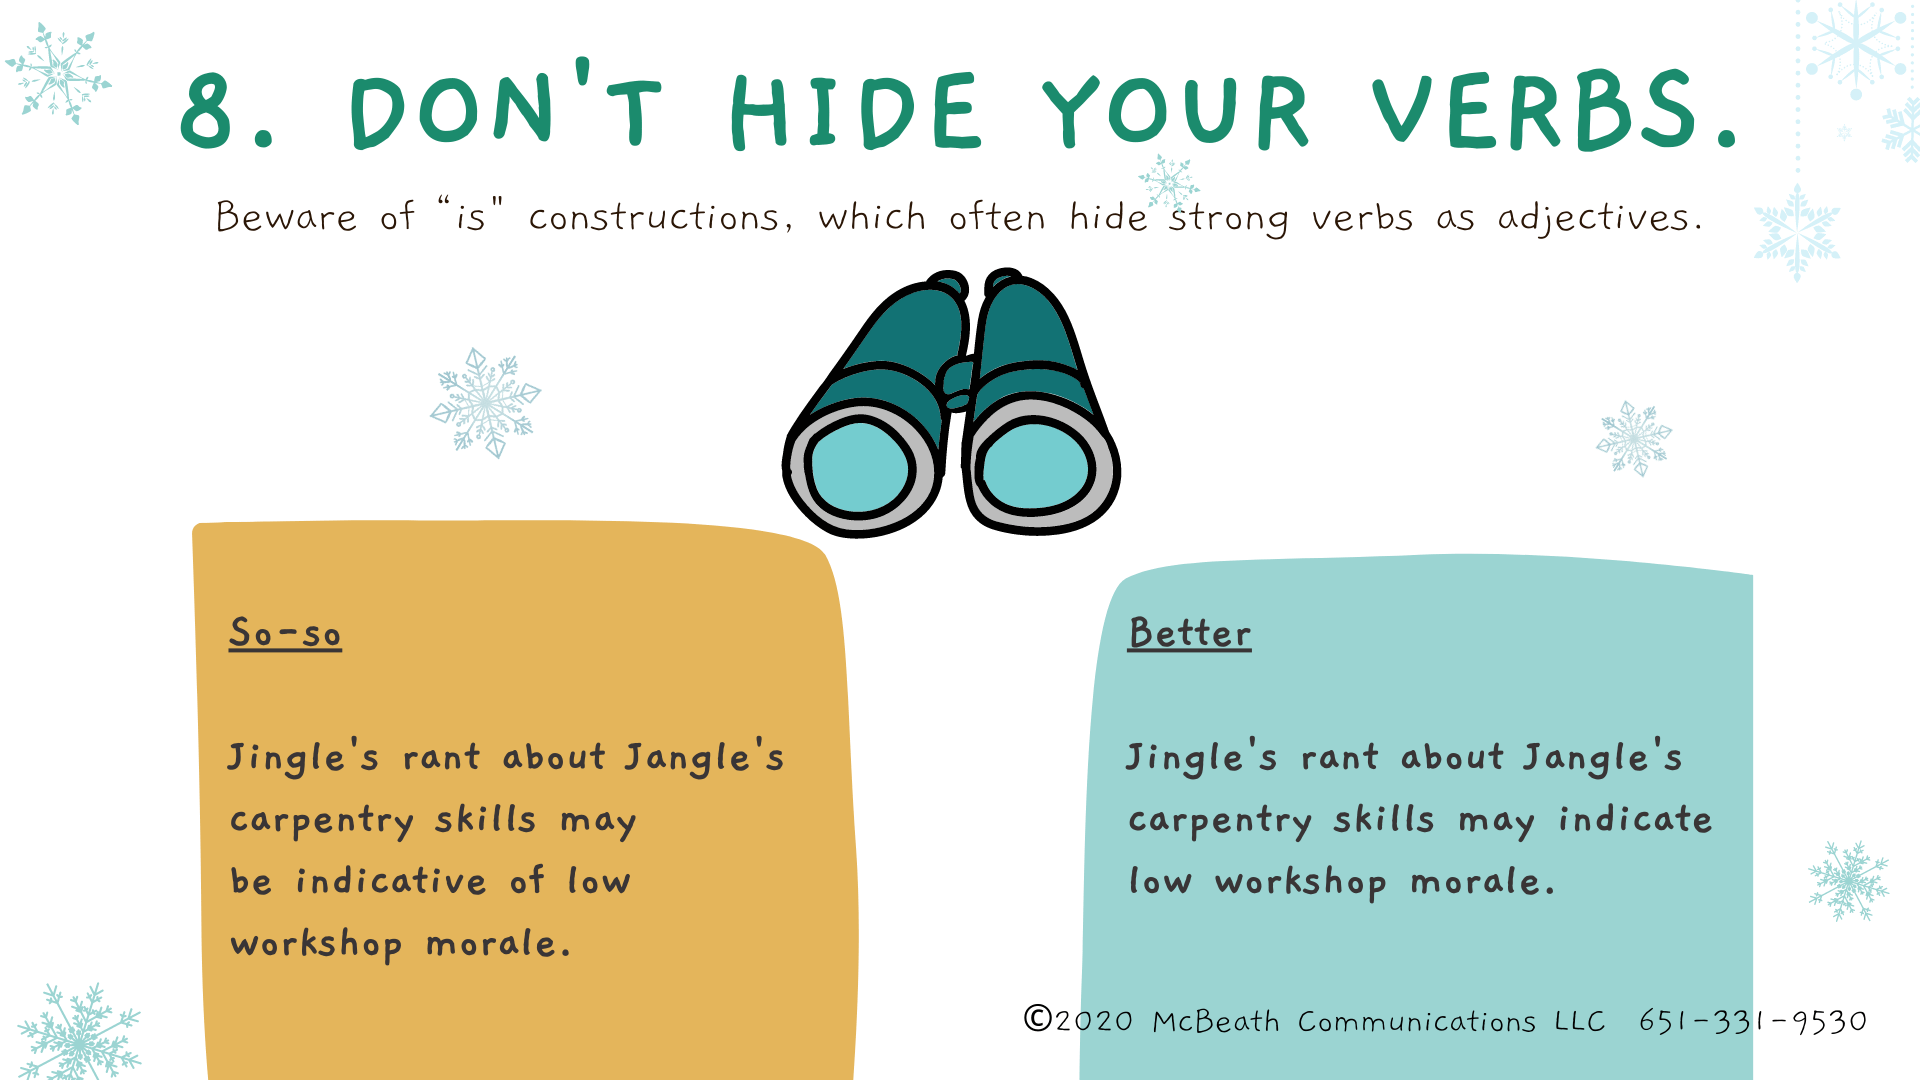 Don't hide your verbs